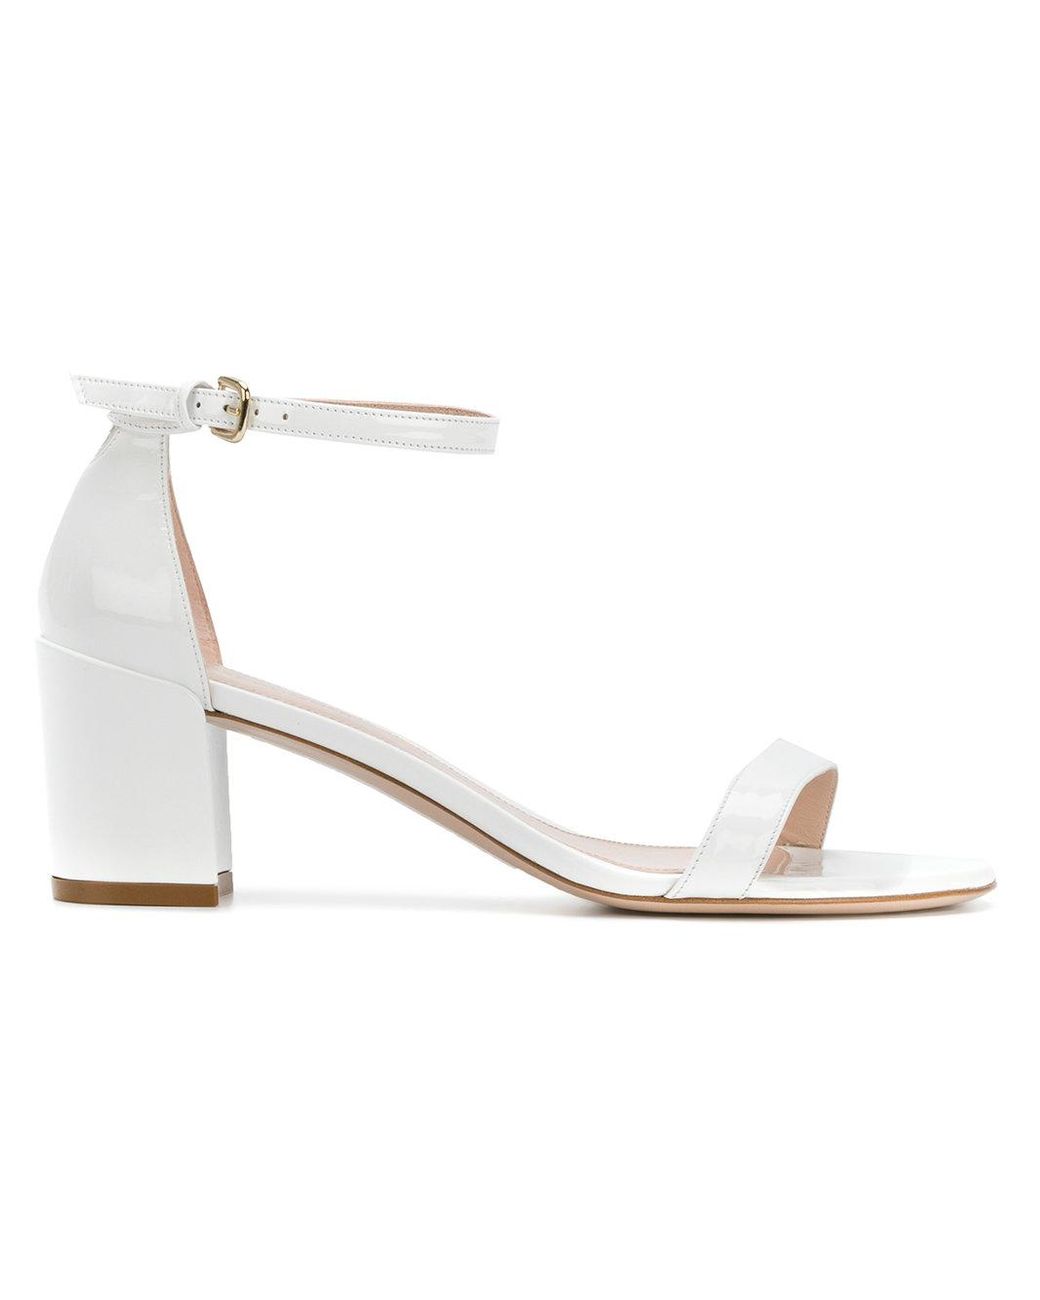 Stuart Weitzman Leather Simple Sandals in White | Lyst